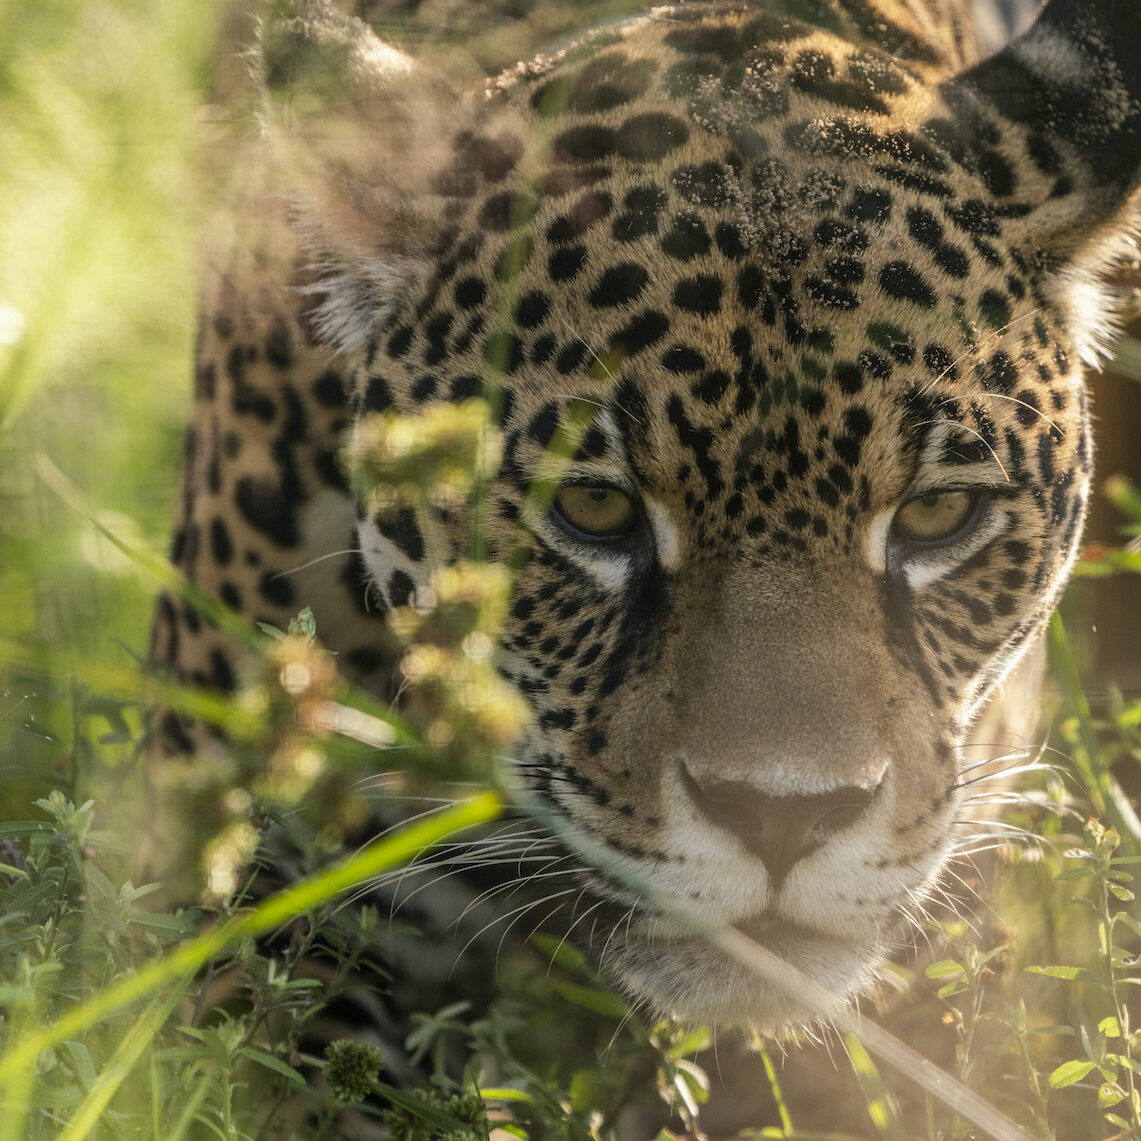 Jaguar in Iberá Argentina, transformative journeys with journeys with purpose